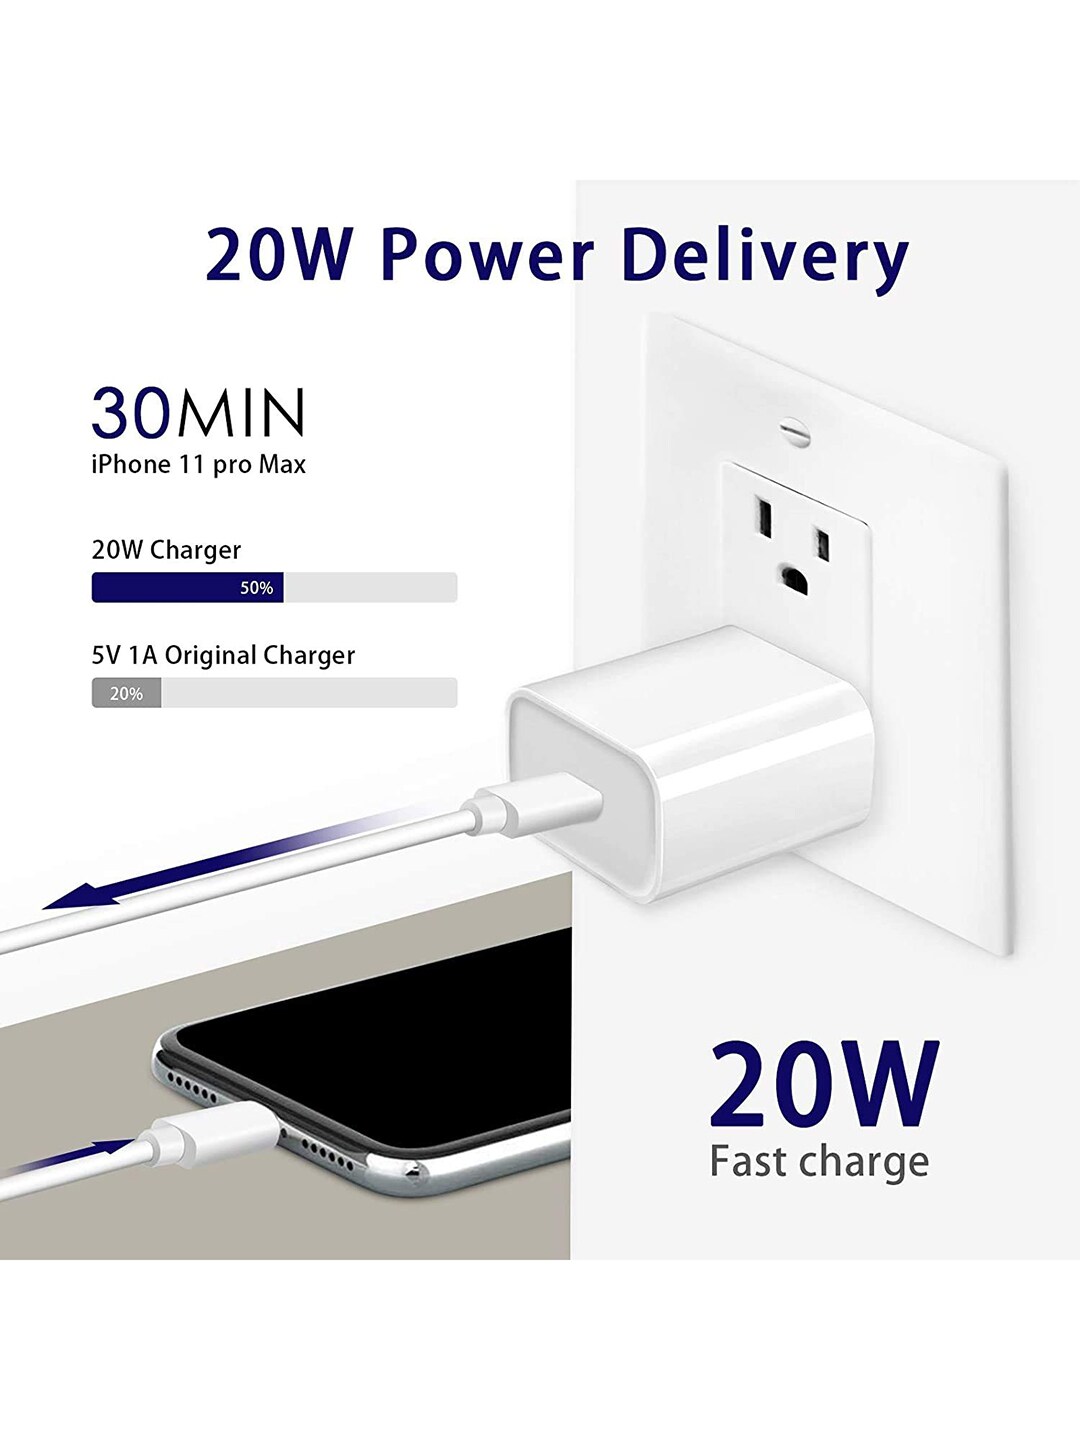 EYNK White Mobile Charging Adapter Accessories Price in India